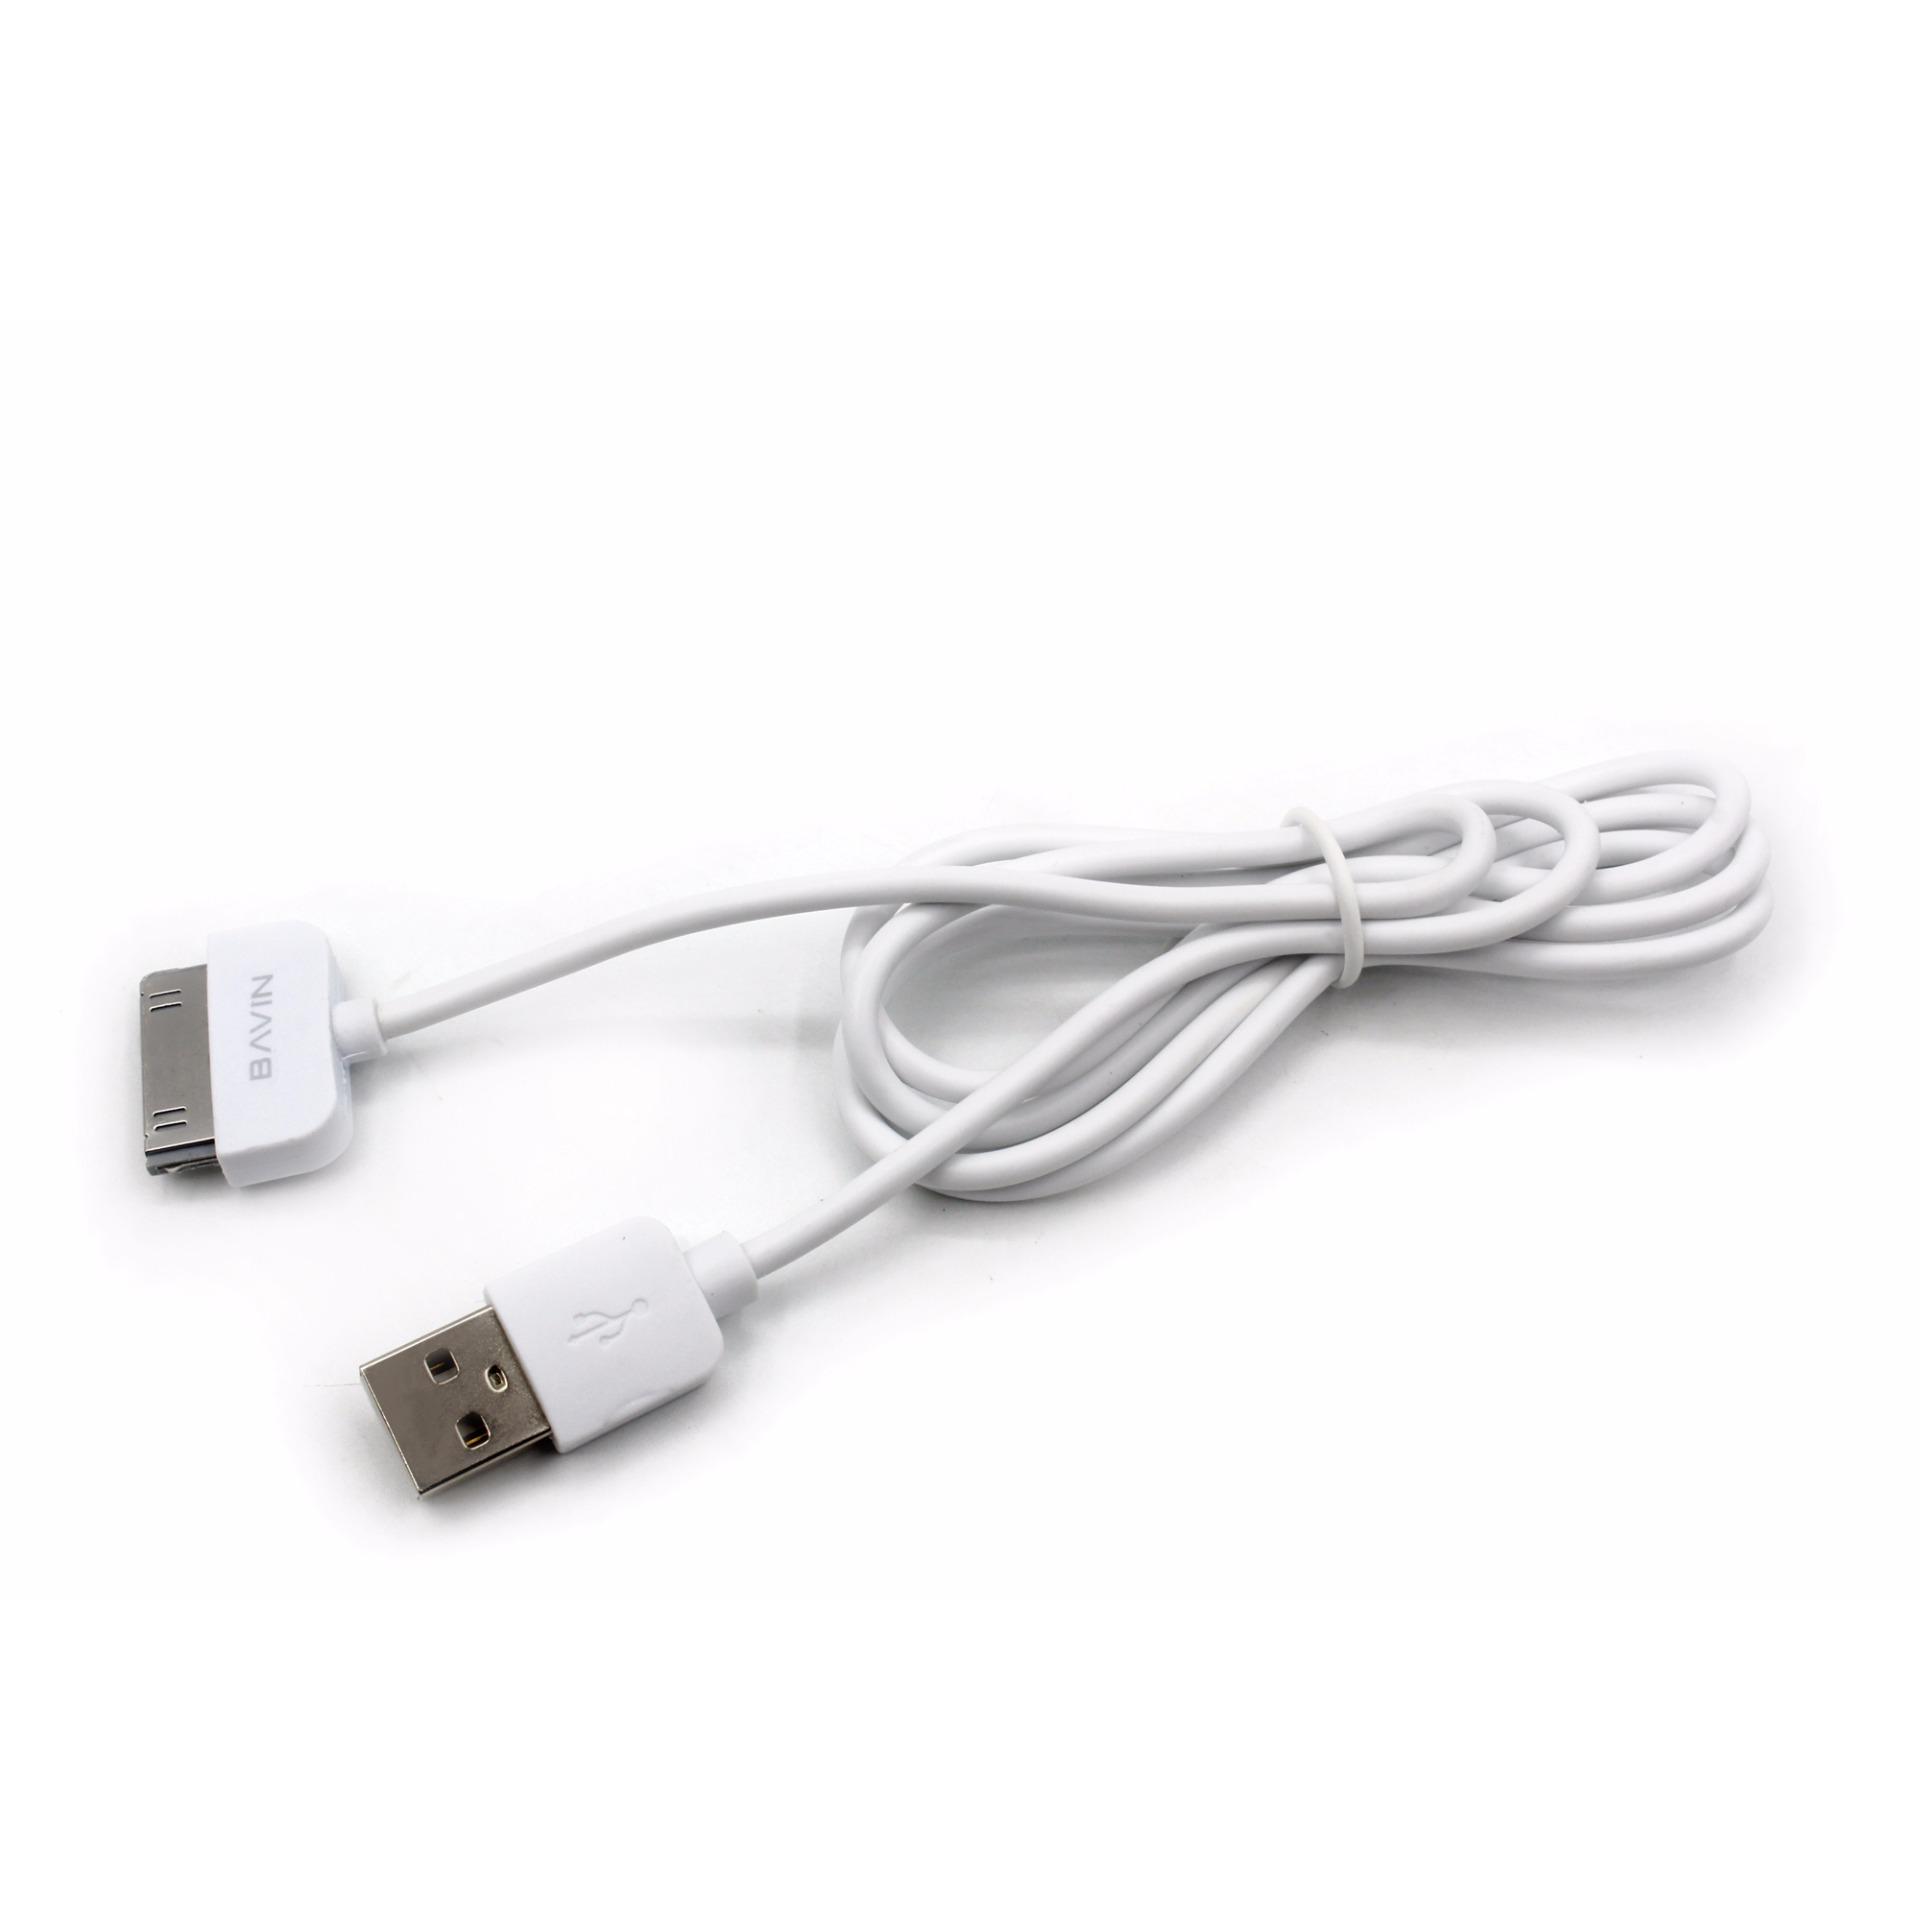 Bavin 1 meter iPad Data and Charging Cable Connector Cord for iPad 1, 2 ...